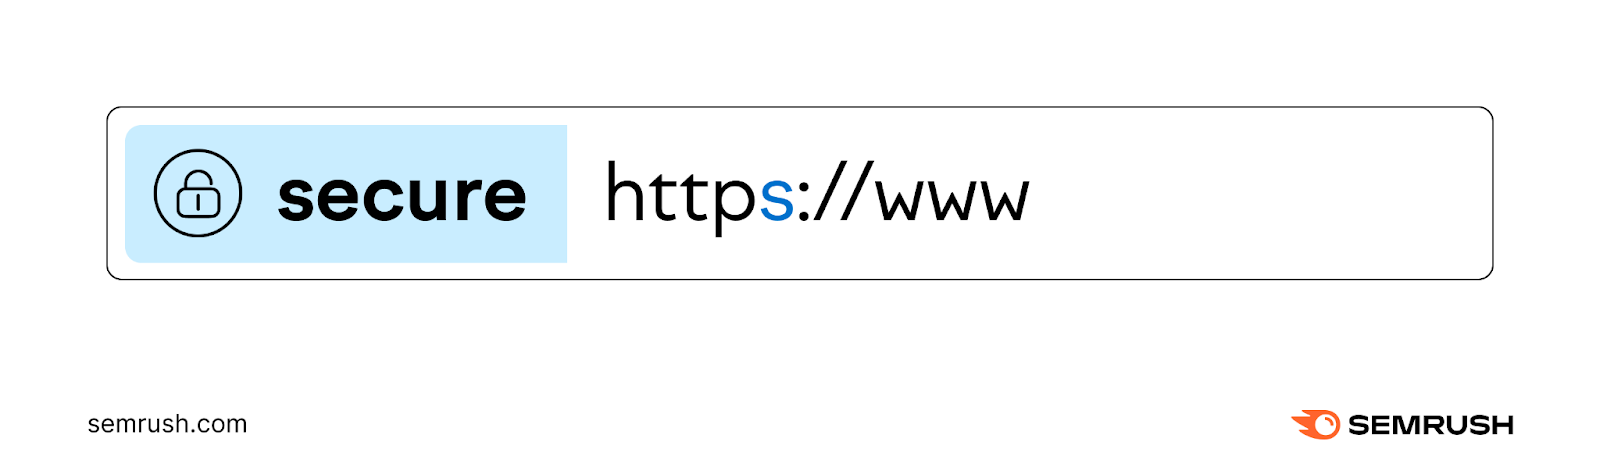 A padlock symbol in browser’s address bar, with HTTPS protocol